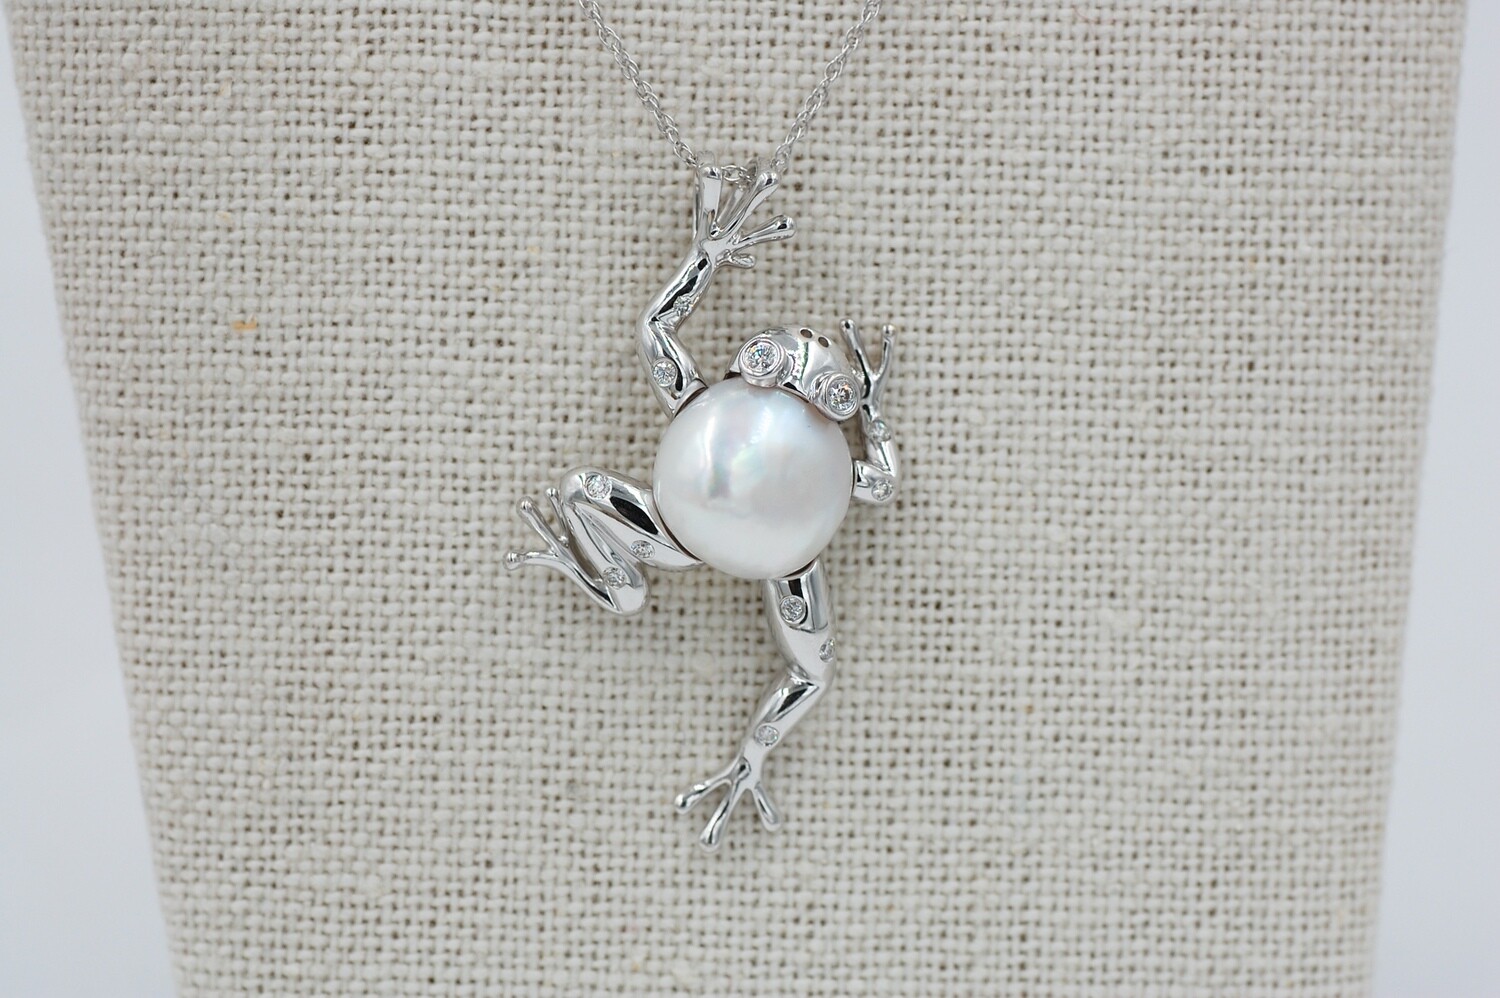 14kwg Handmade Frog pendant w/ Mabe' pearl body and diamond eyes - 18" chain